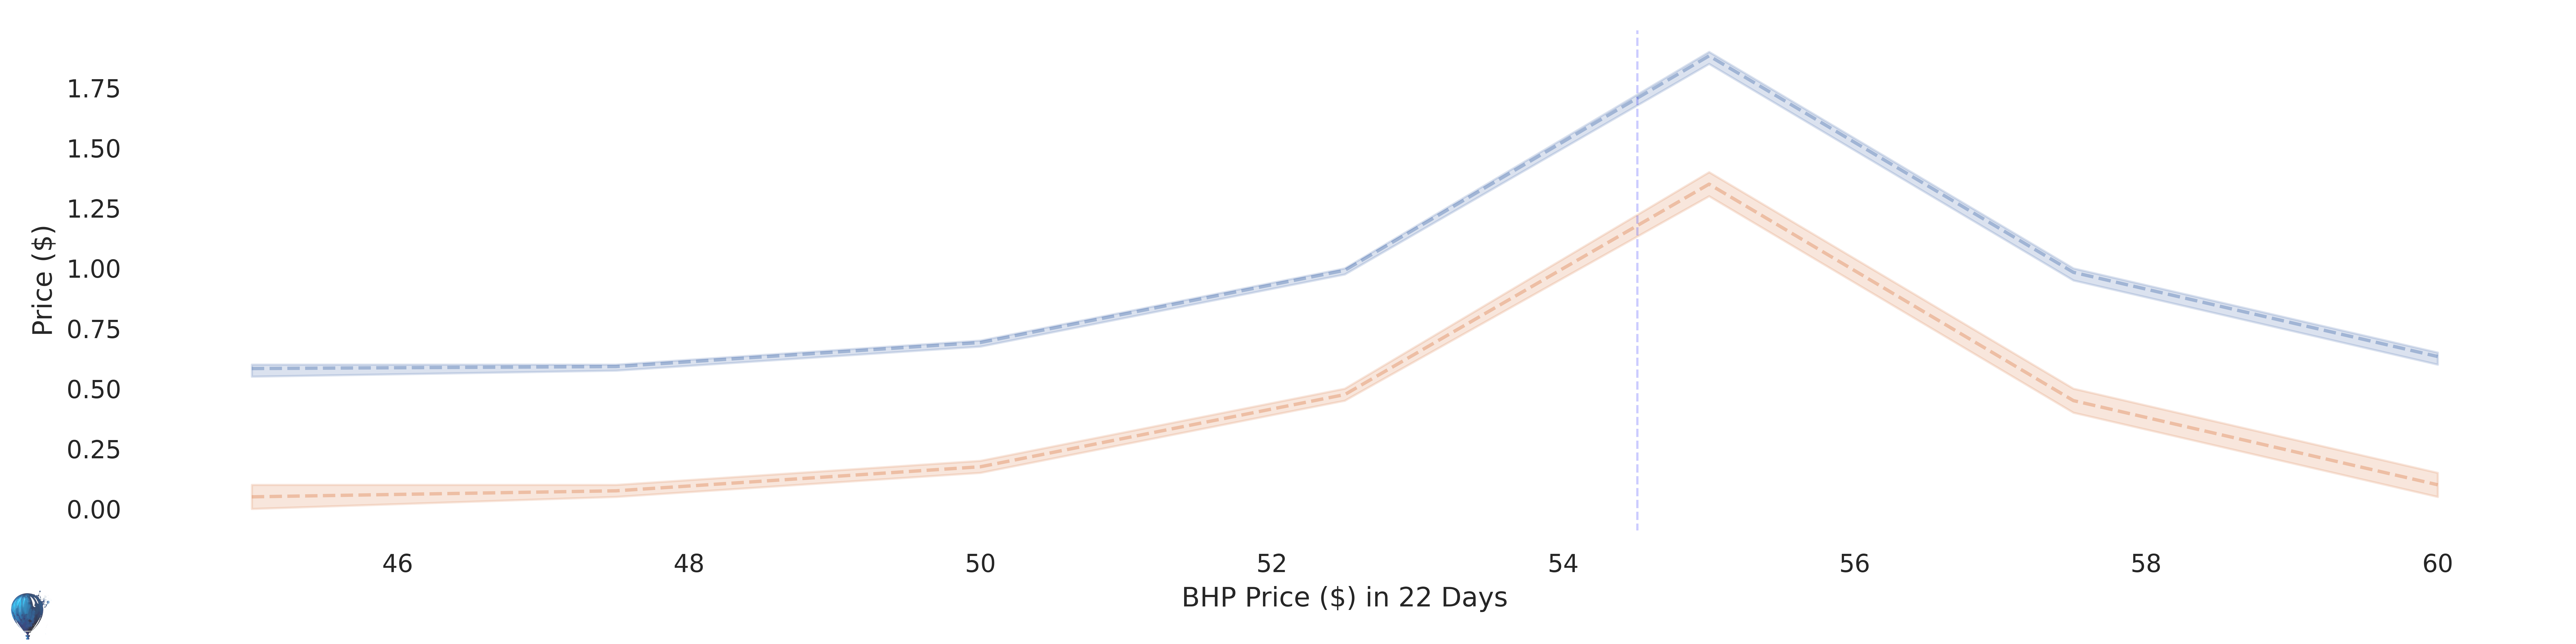 BHP current options pricing